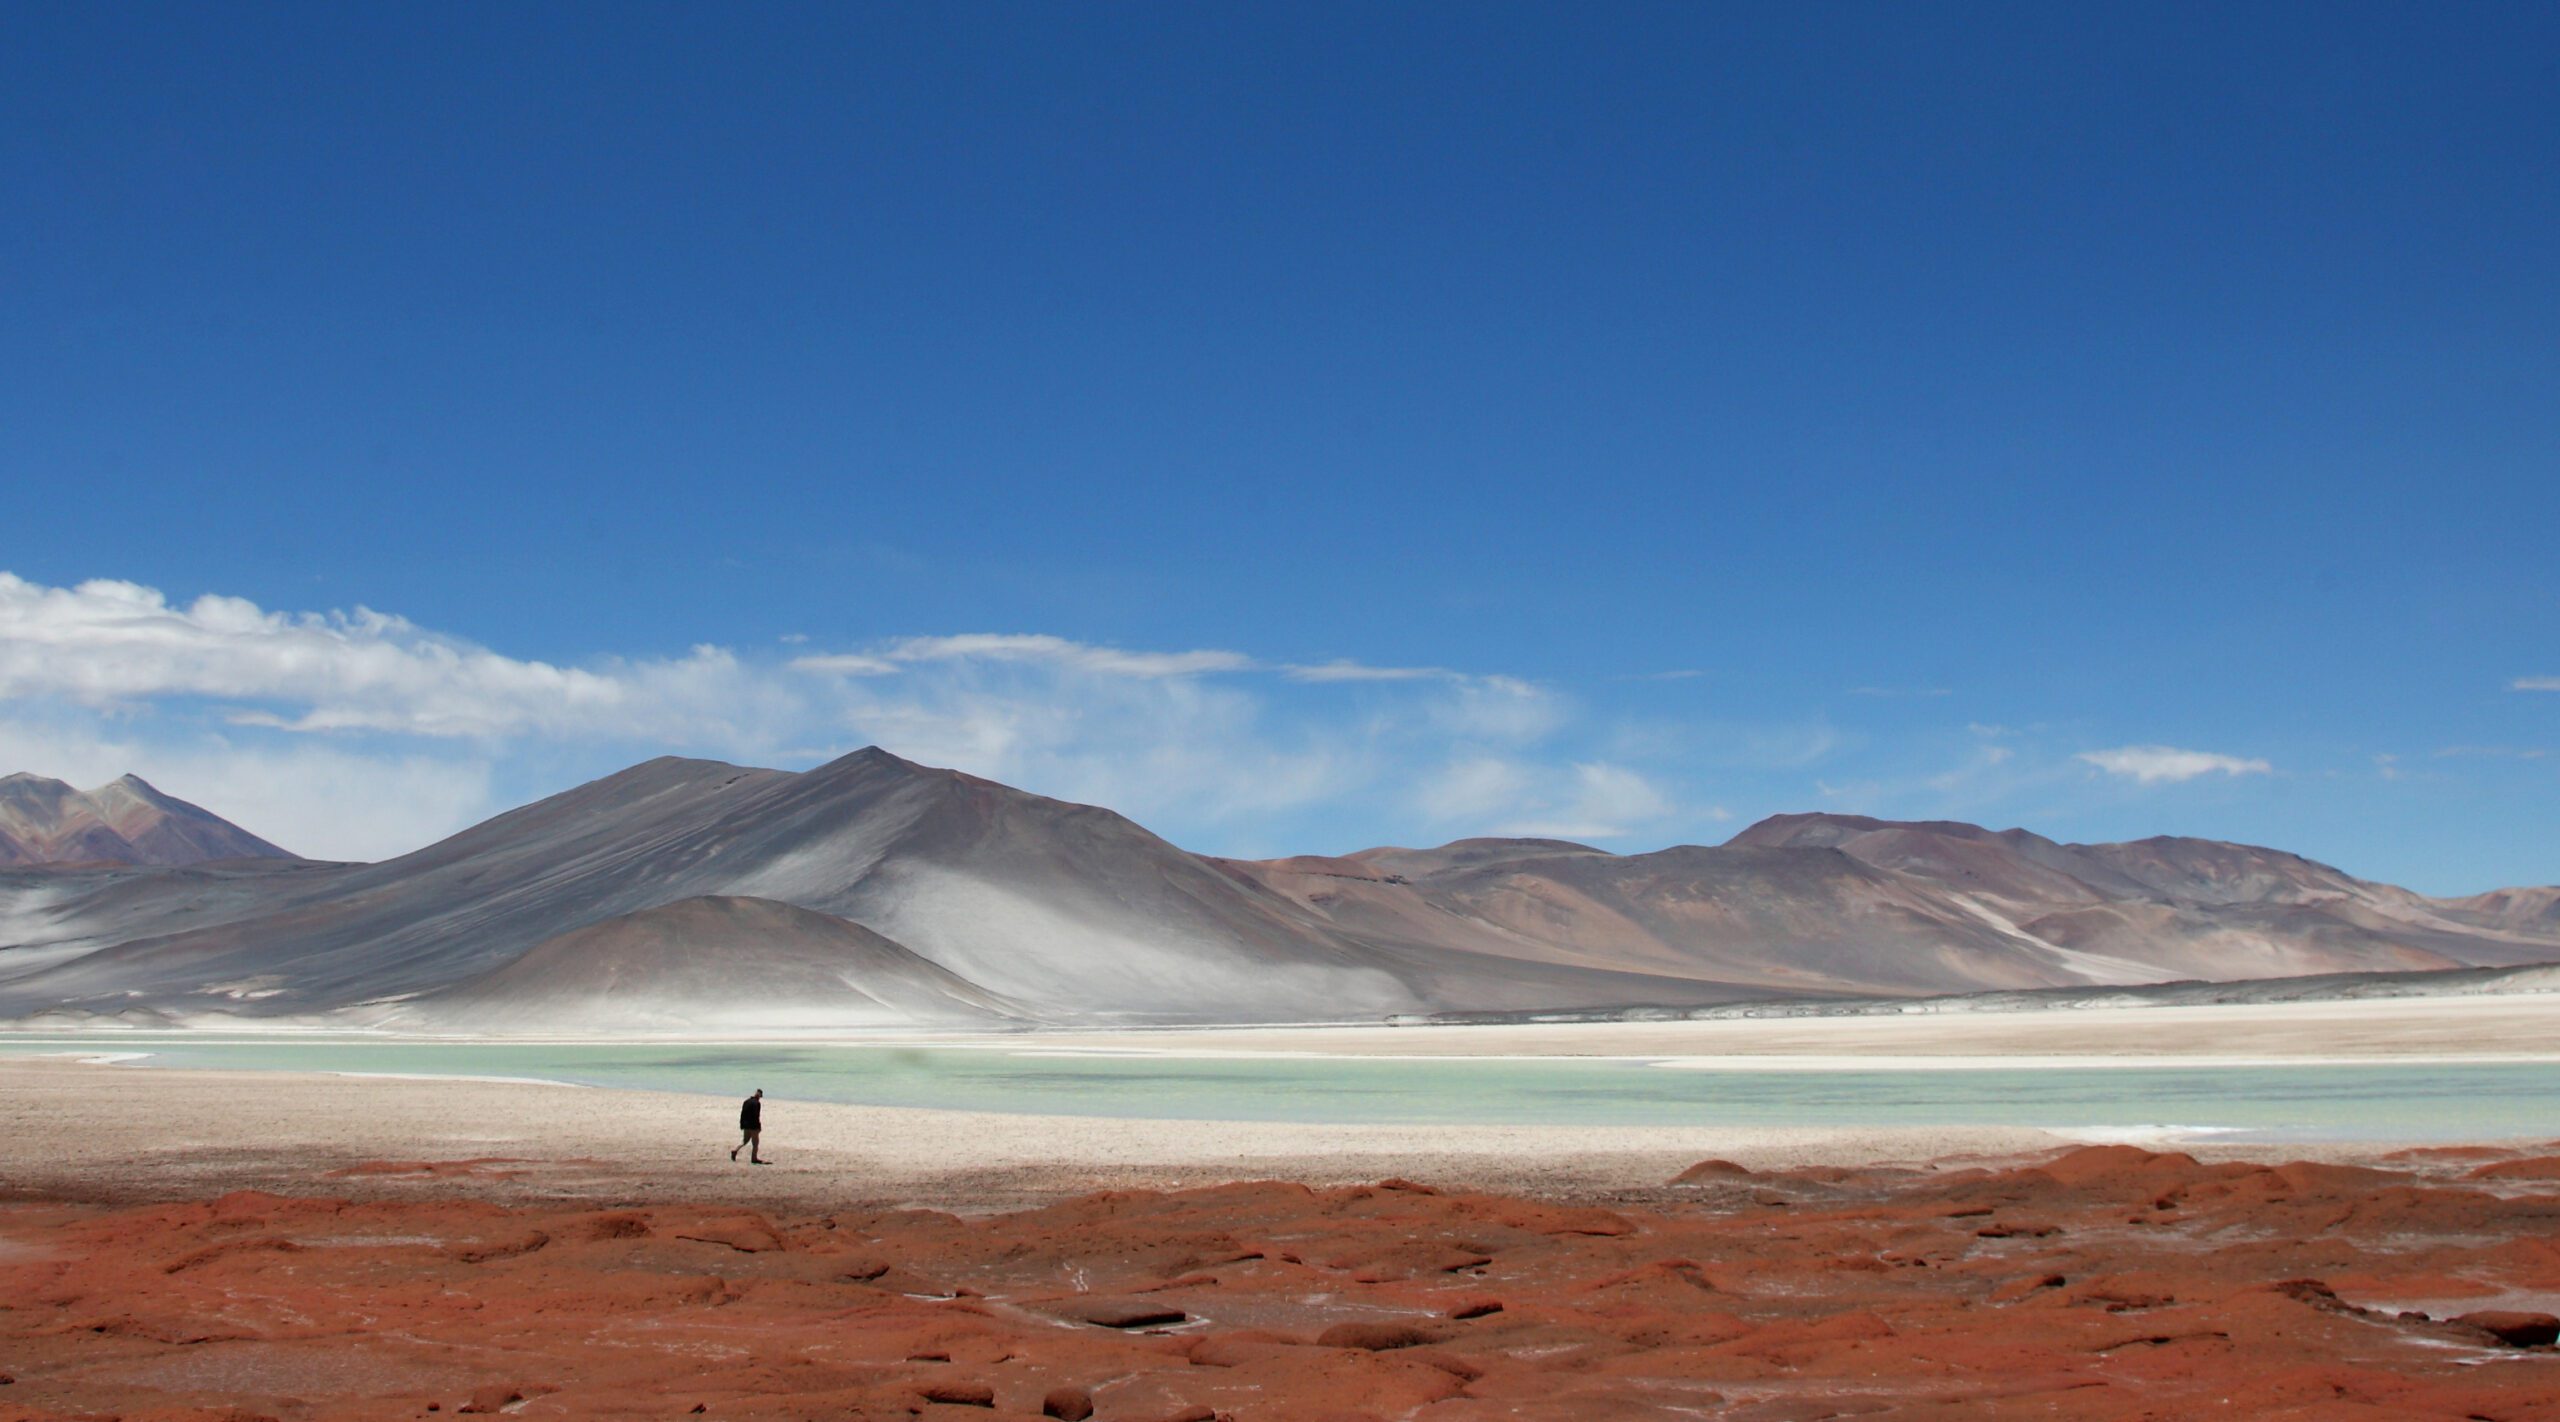 A lone person standing in the middle of a desert.